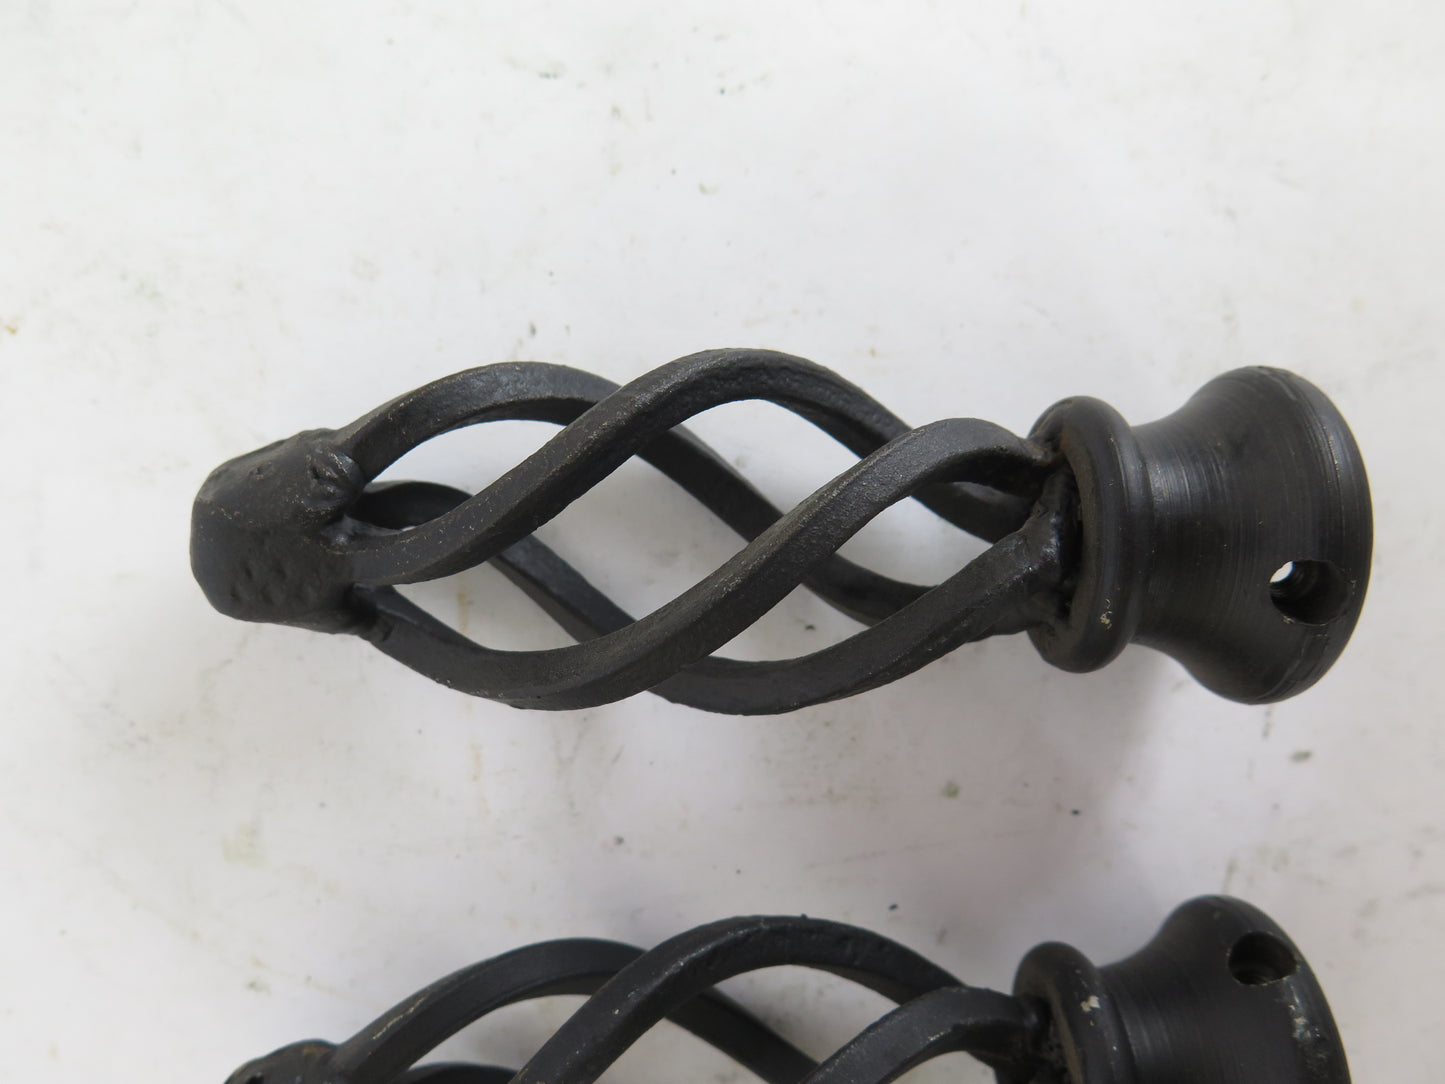 PAIR OF VINTAGE HANDMADE WROUGHT IRON CURTAIN ROD POINTS CH16